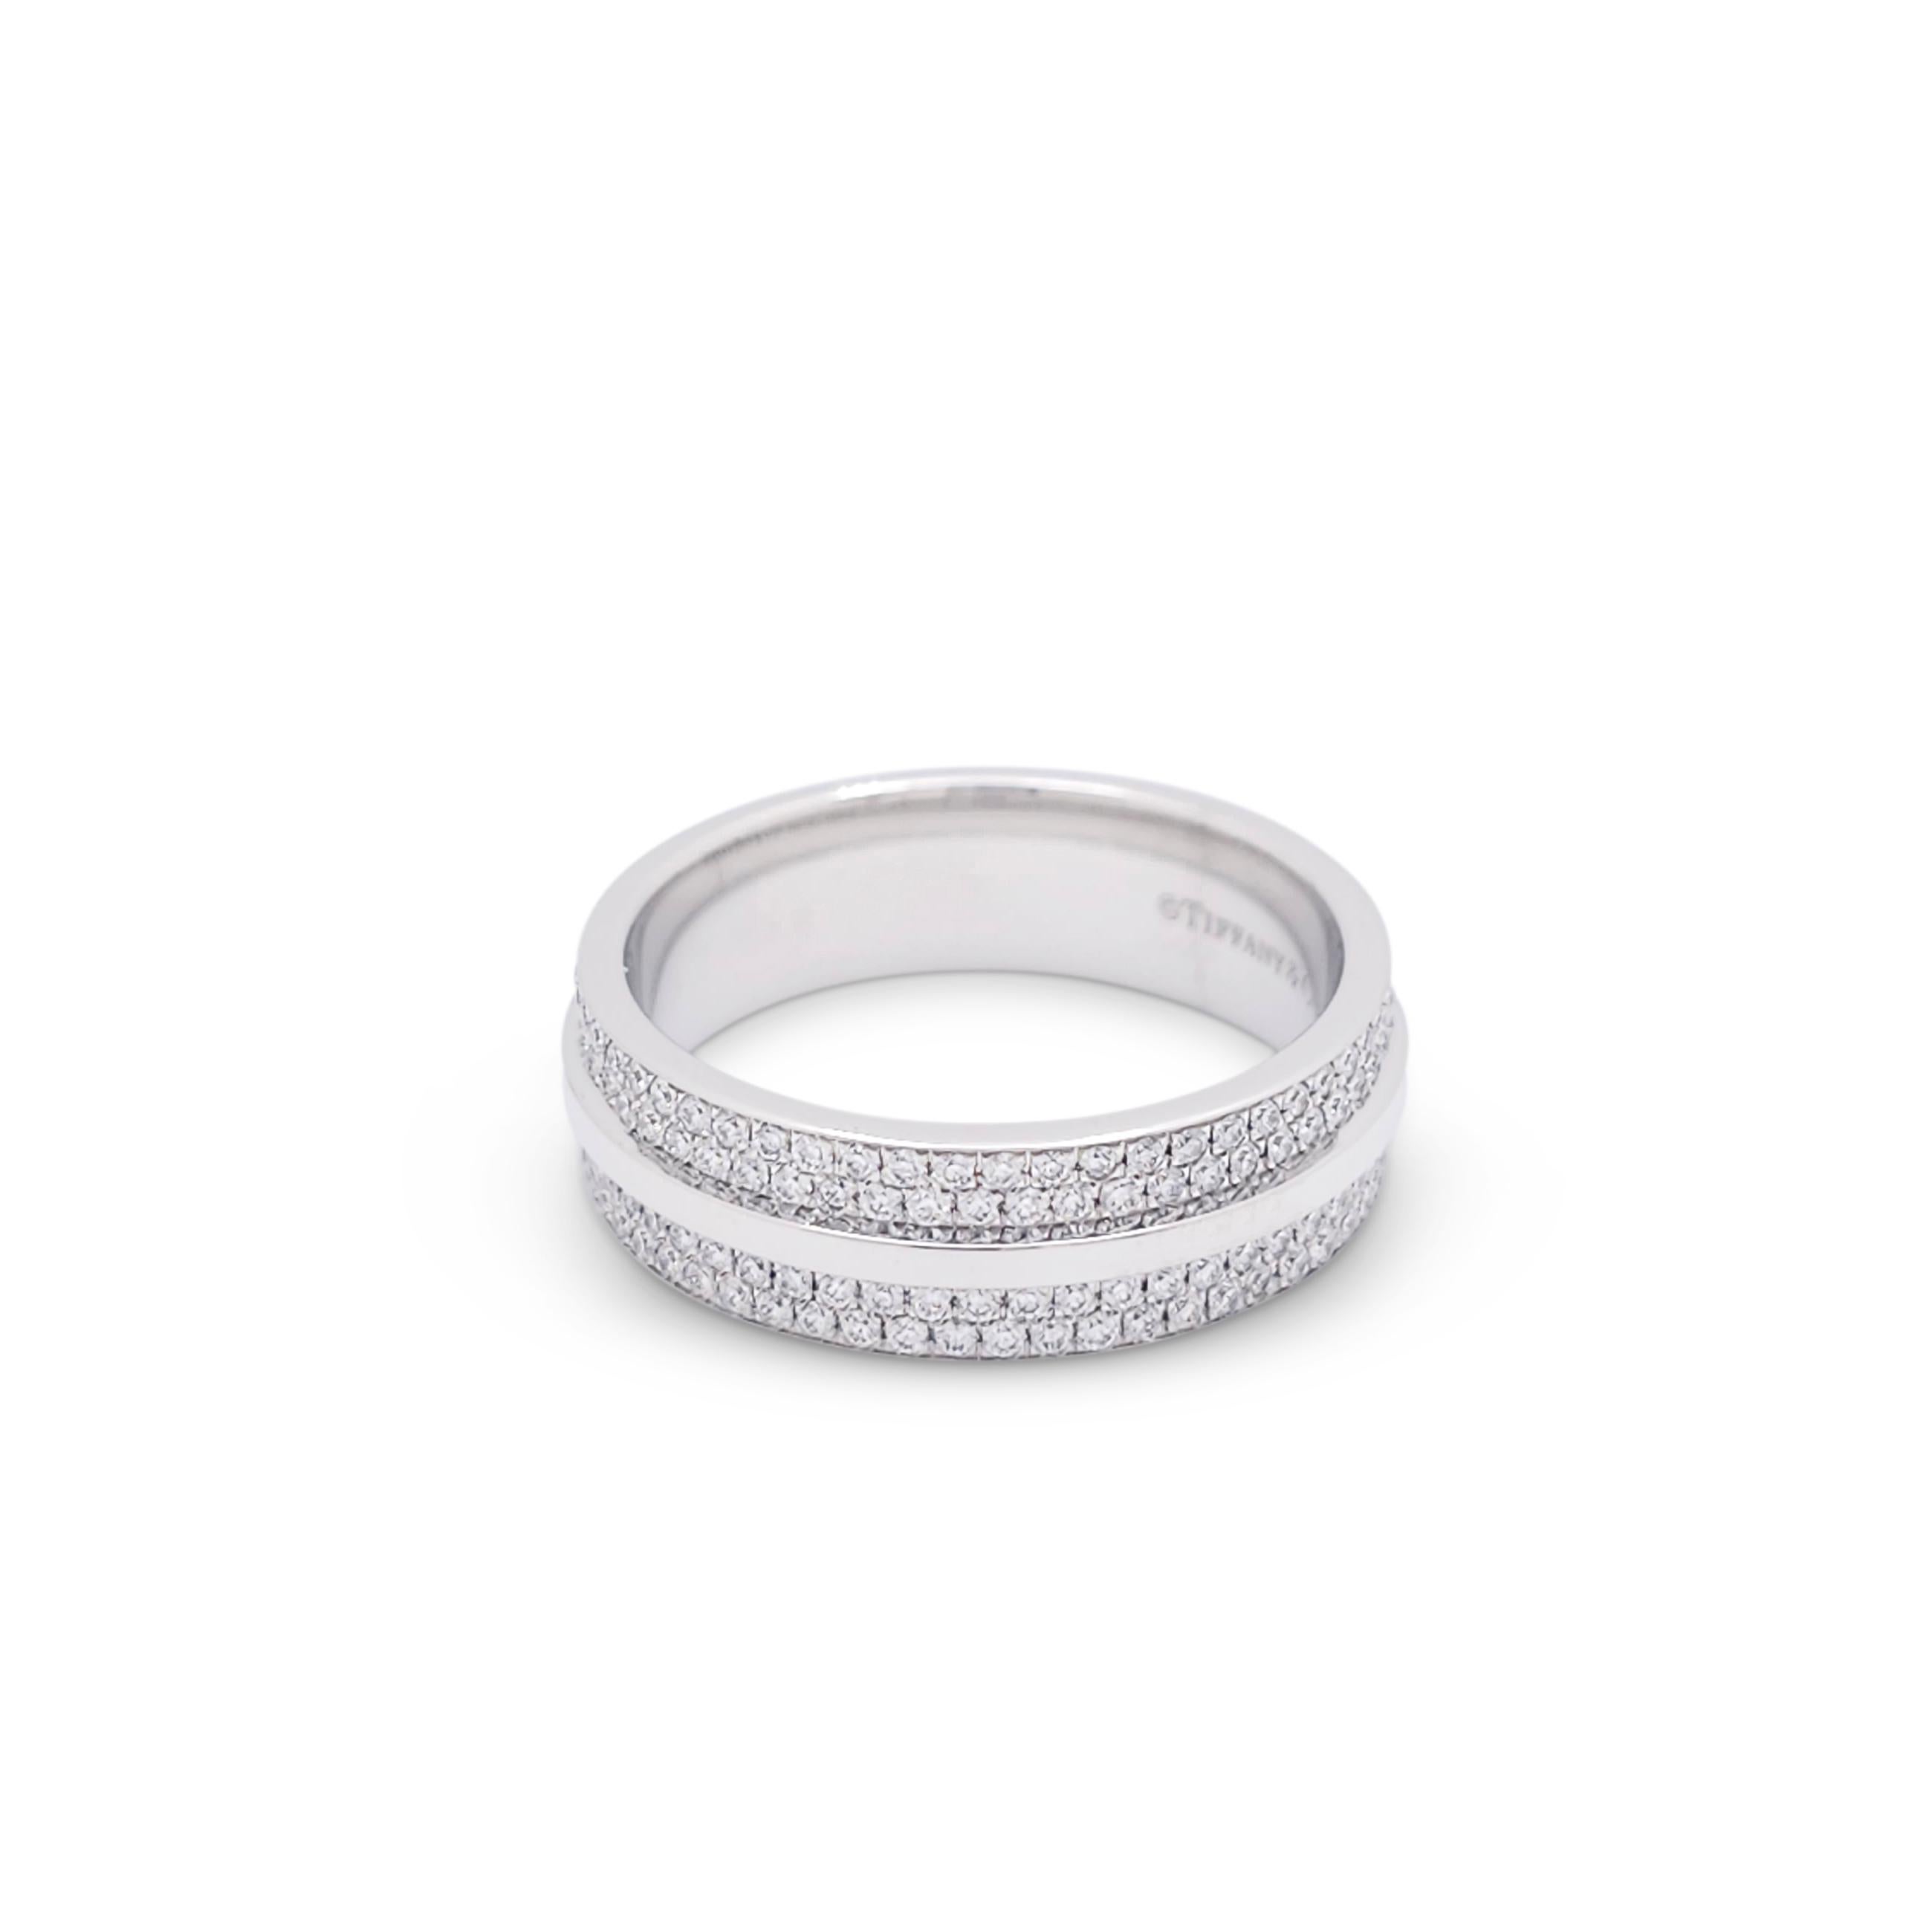 Authentic Tiffany & Co. ring from the Tiffany T collection crafted in 18 karat white gold.  The form of the letter 'T' wraps around the band and is outlined by a background of glittering pavé set diamonds weighing an estimated 0.57 carats total. 